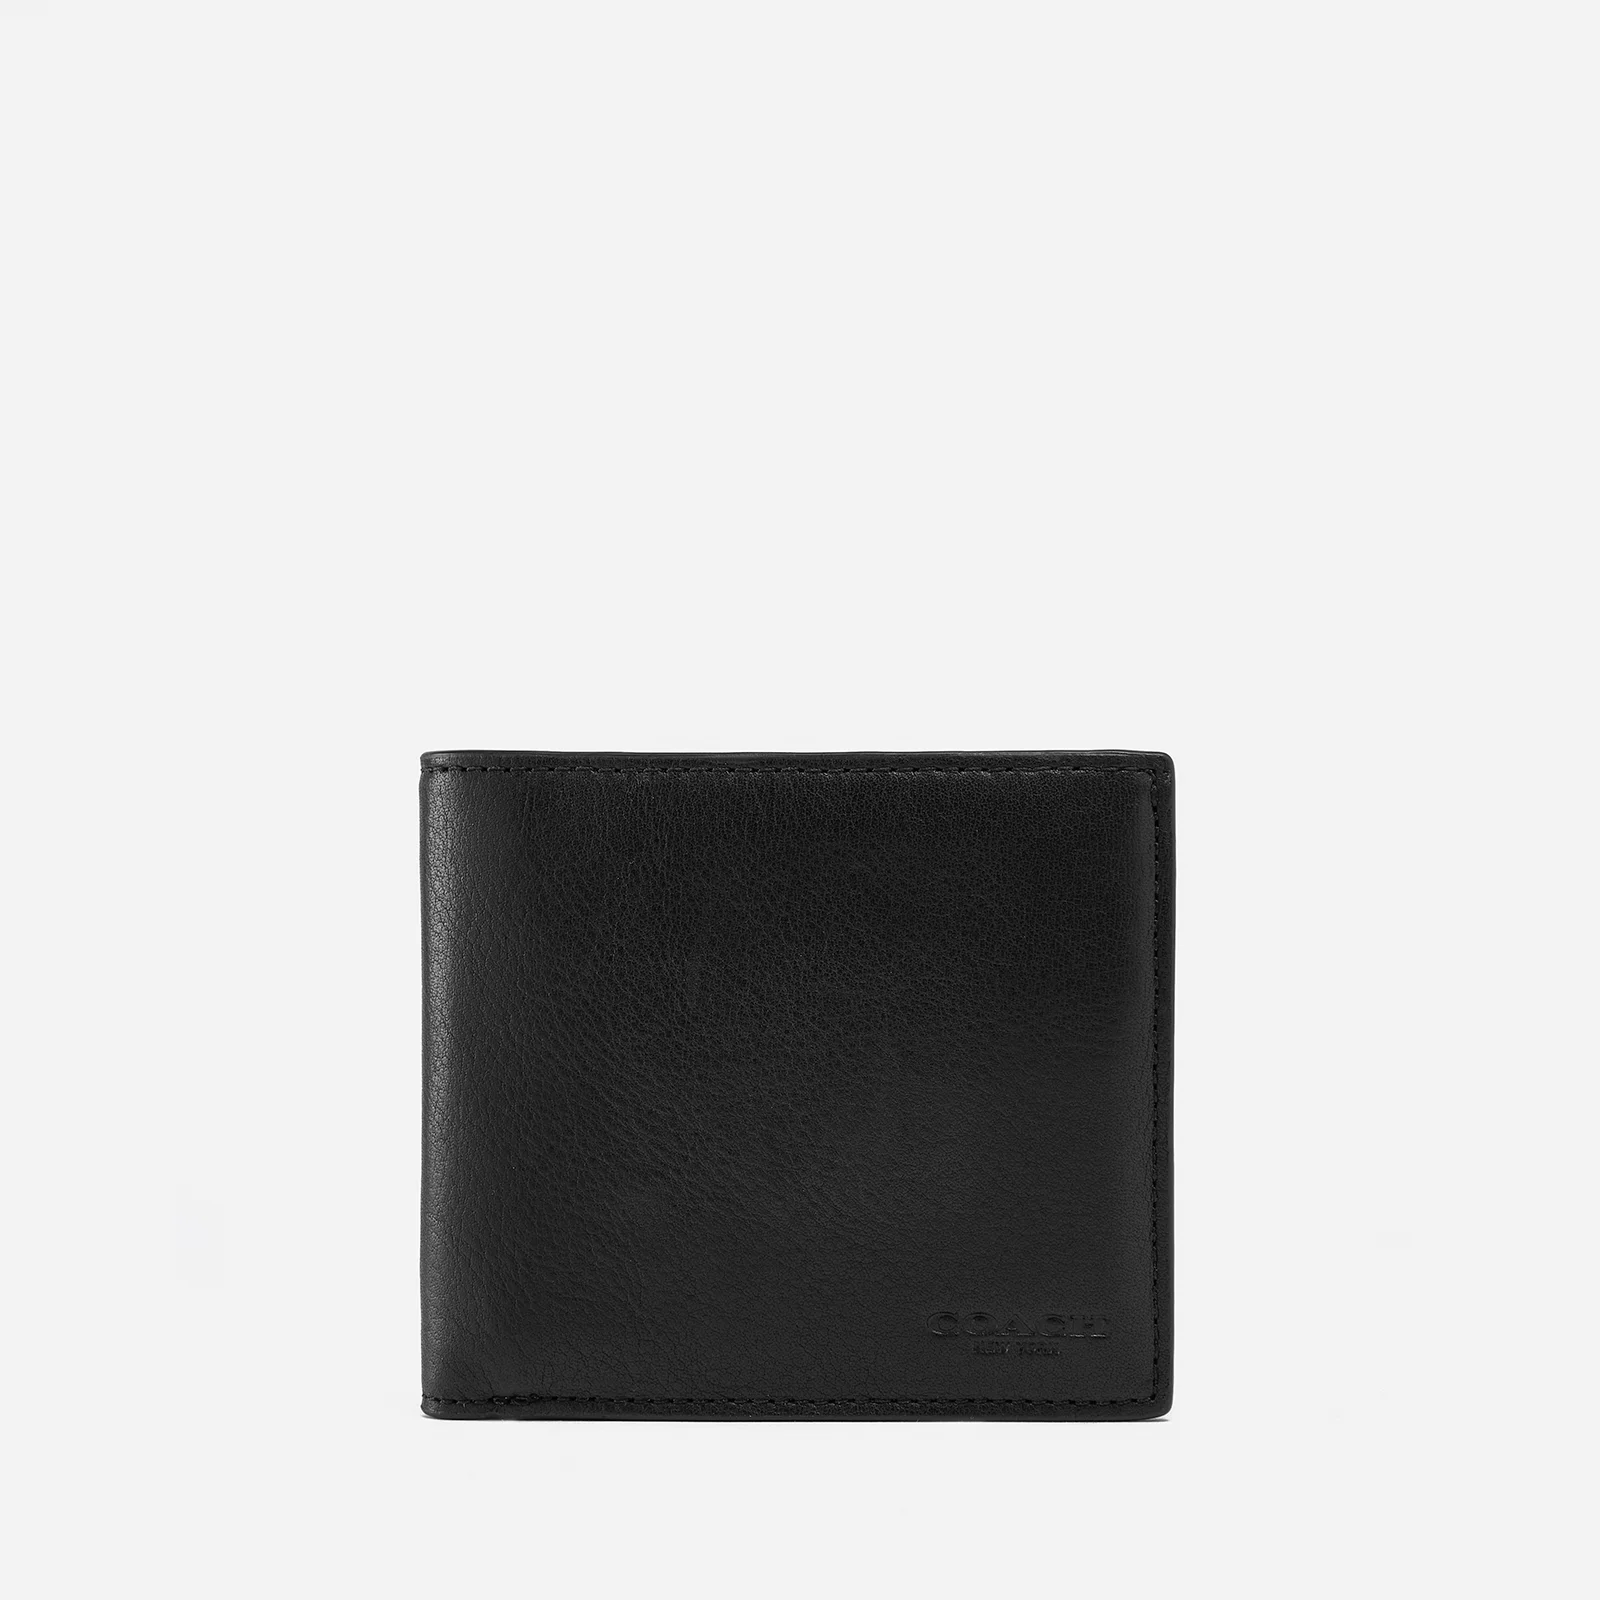 Coach Leather Coin Wallet Image 1